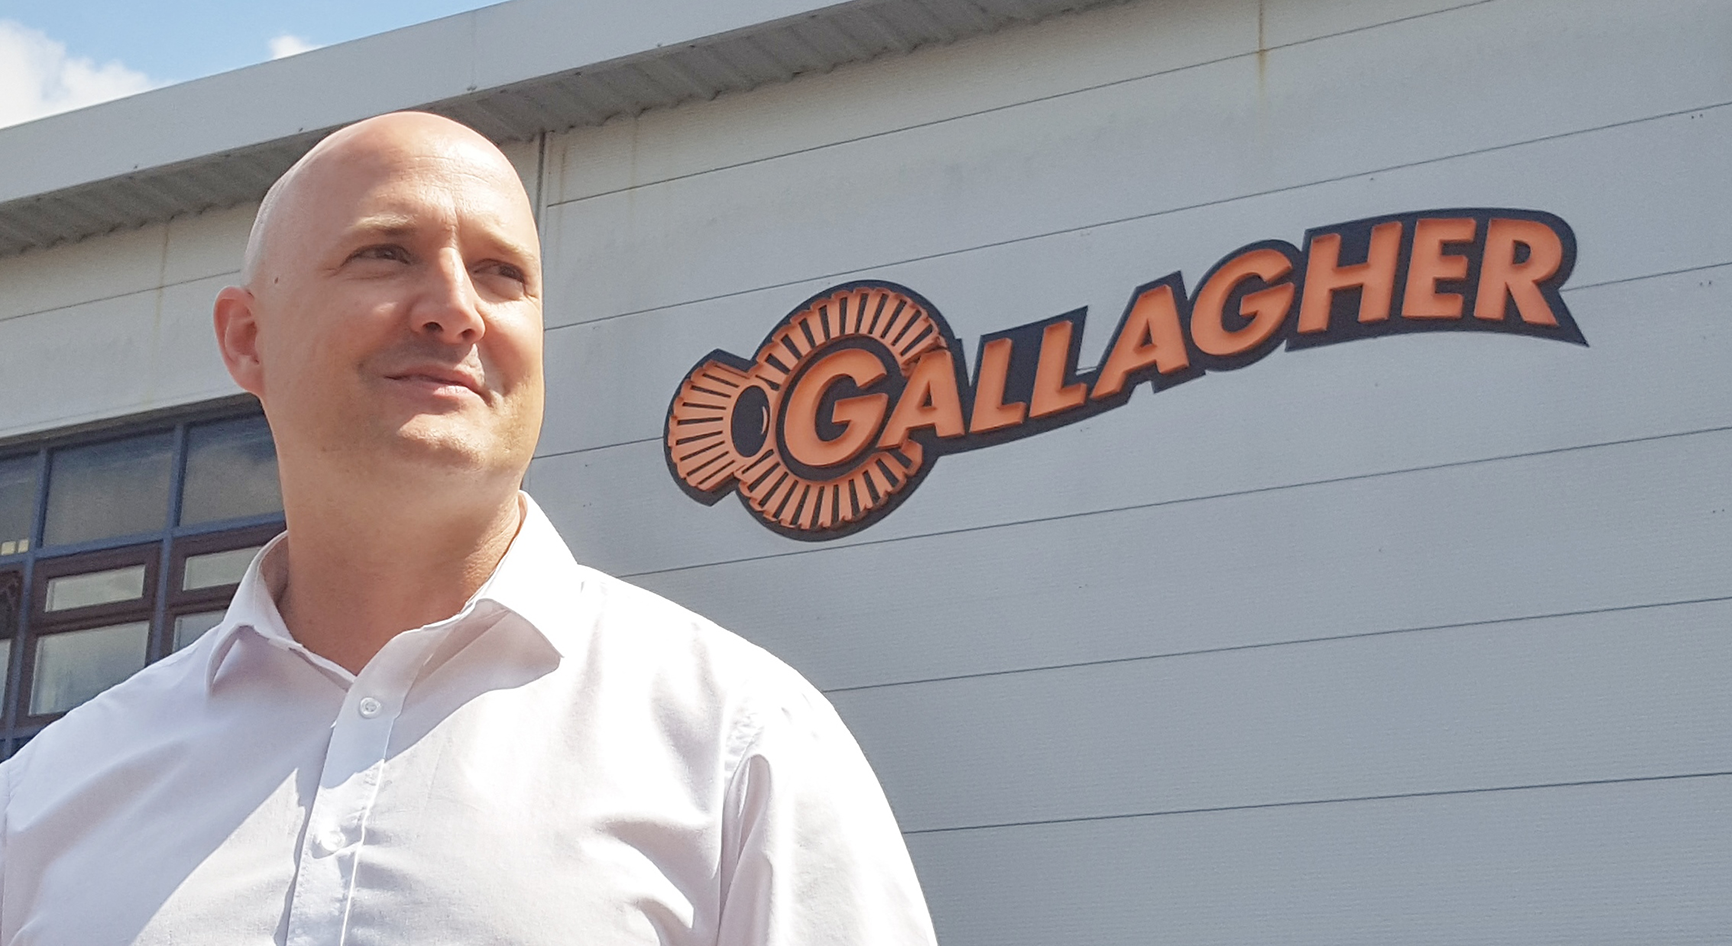 Gallagher Security appoints a Perimeter Business Development Manager